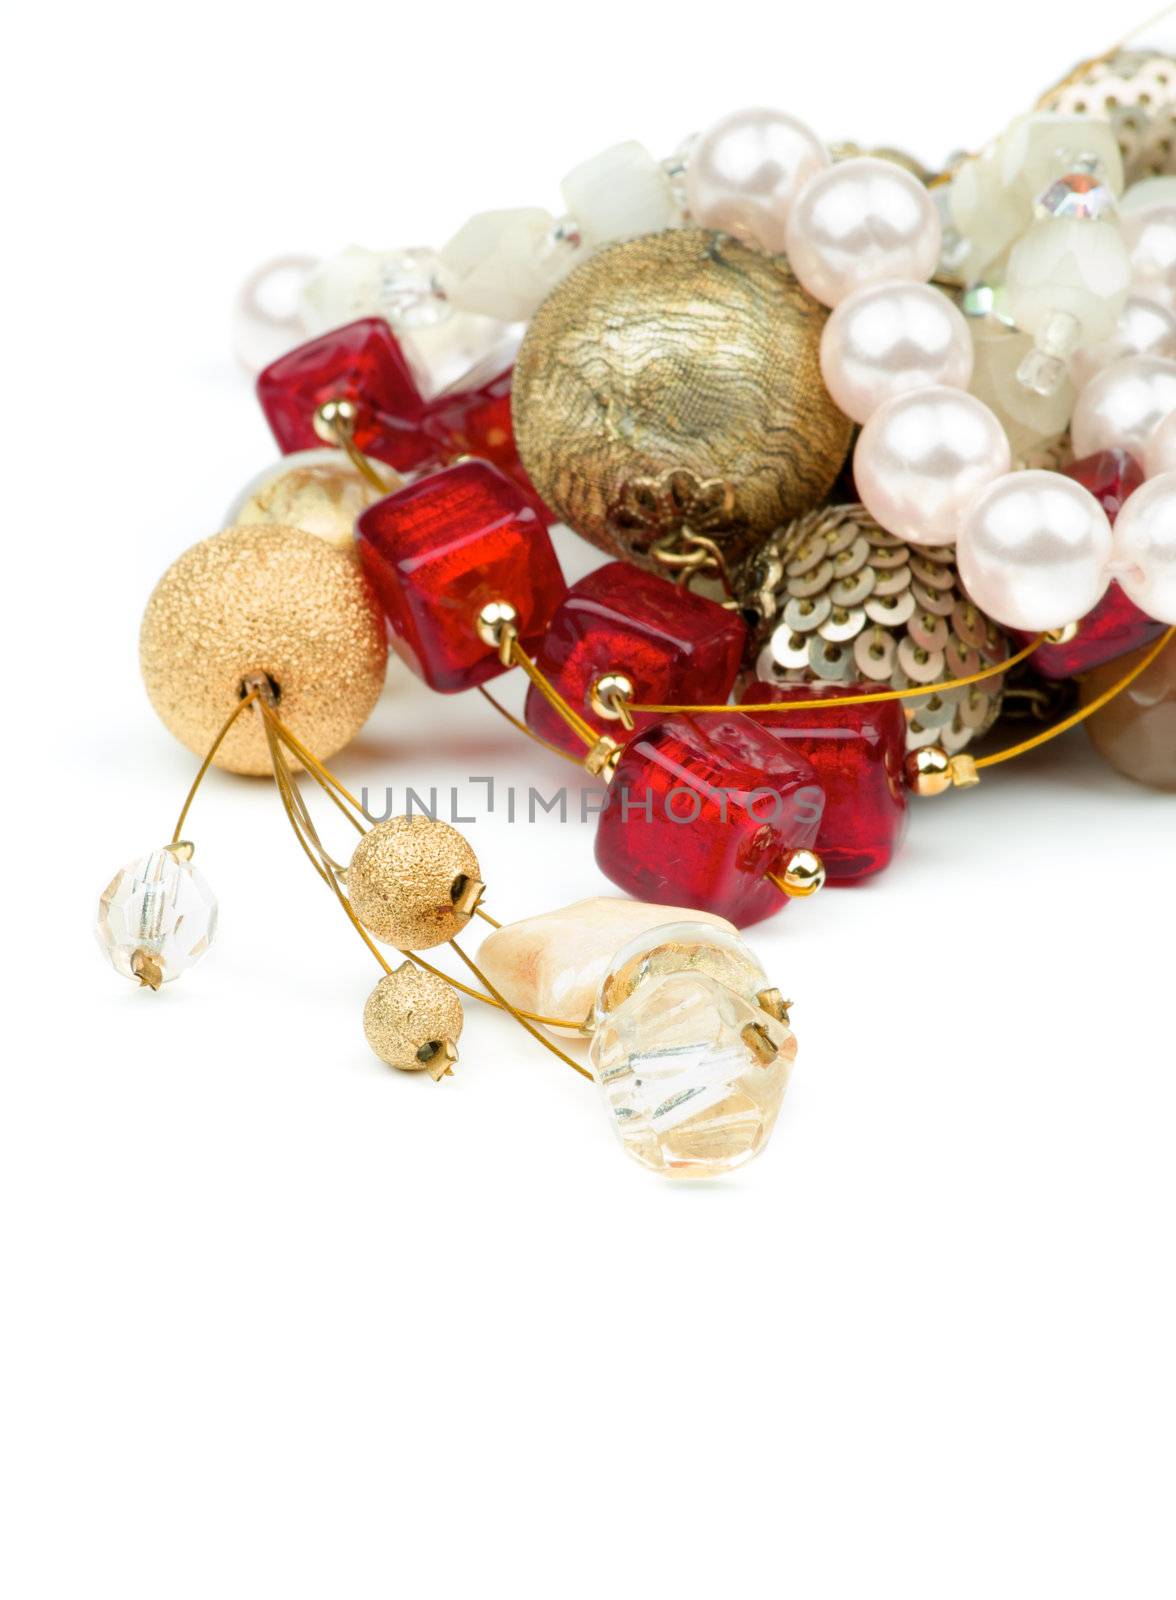 Arrangement Gold Pendant, Ruby Necklace and Jewelry closeup on white background